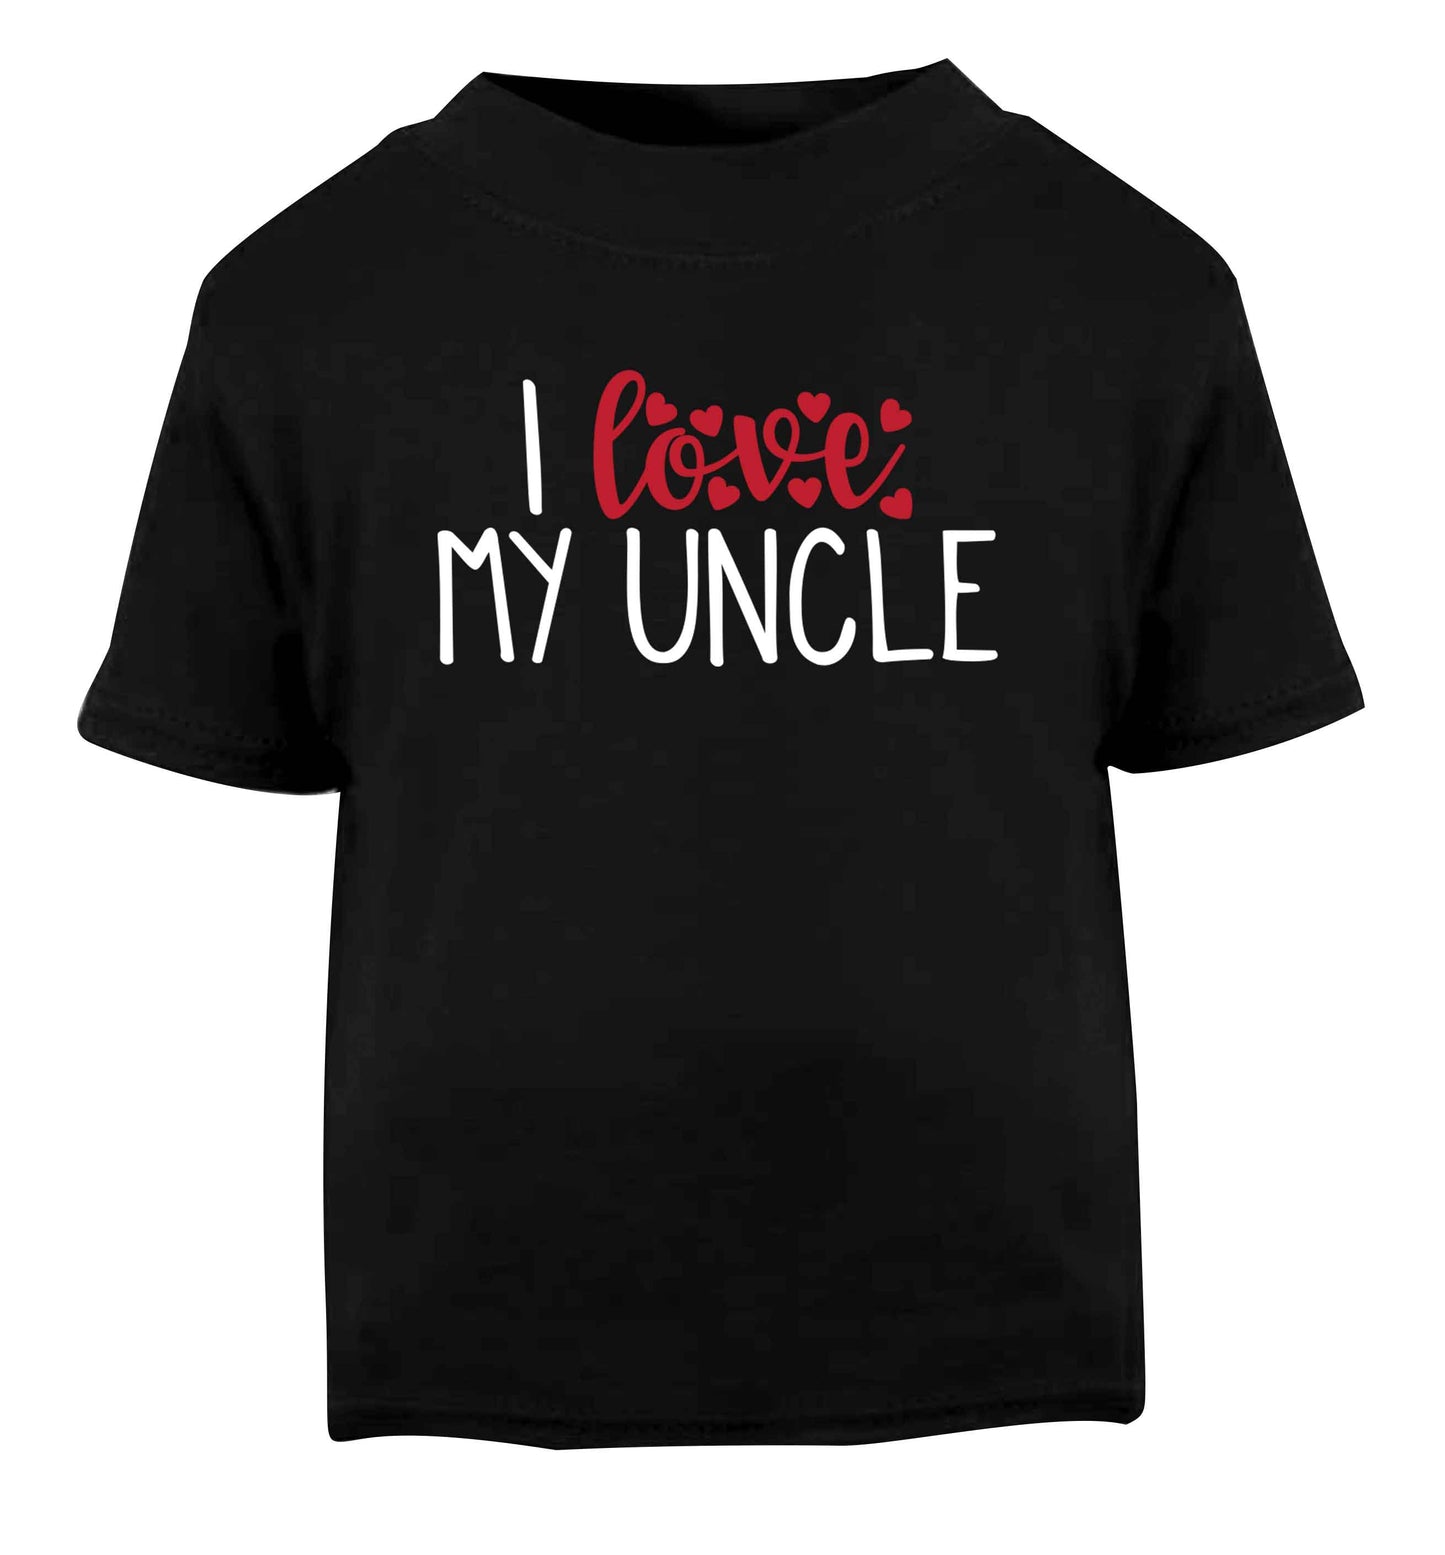 I love my uncle Black Baby Toddler Tshirt 2 years